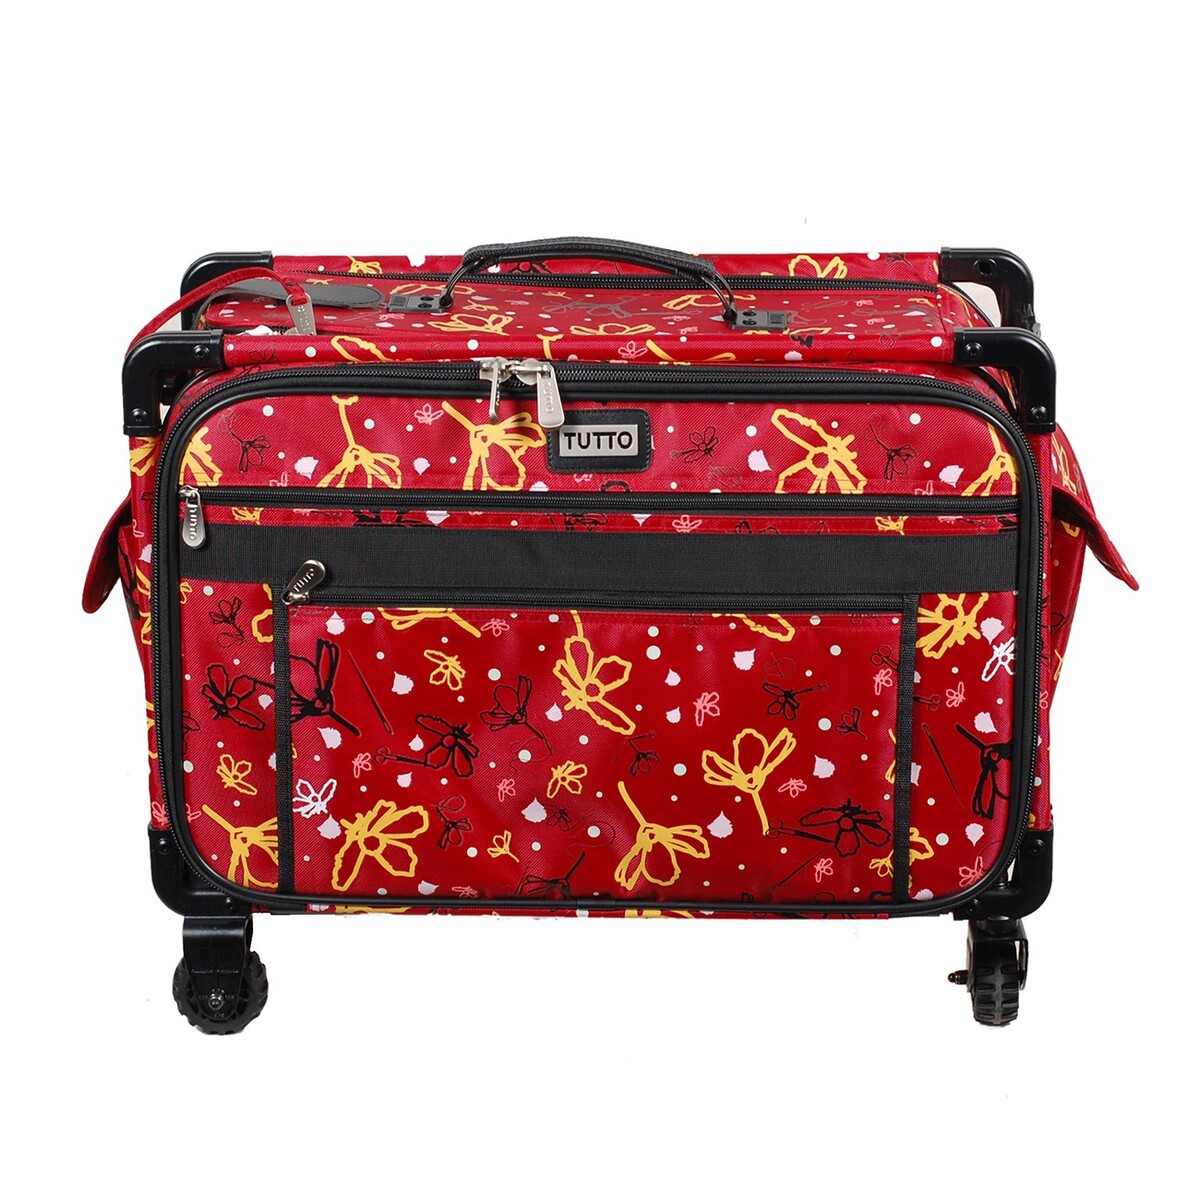 Tutto Large Sewing Machine Bag On Wheels - Red With Daisies